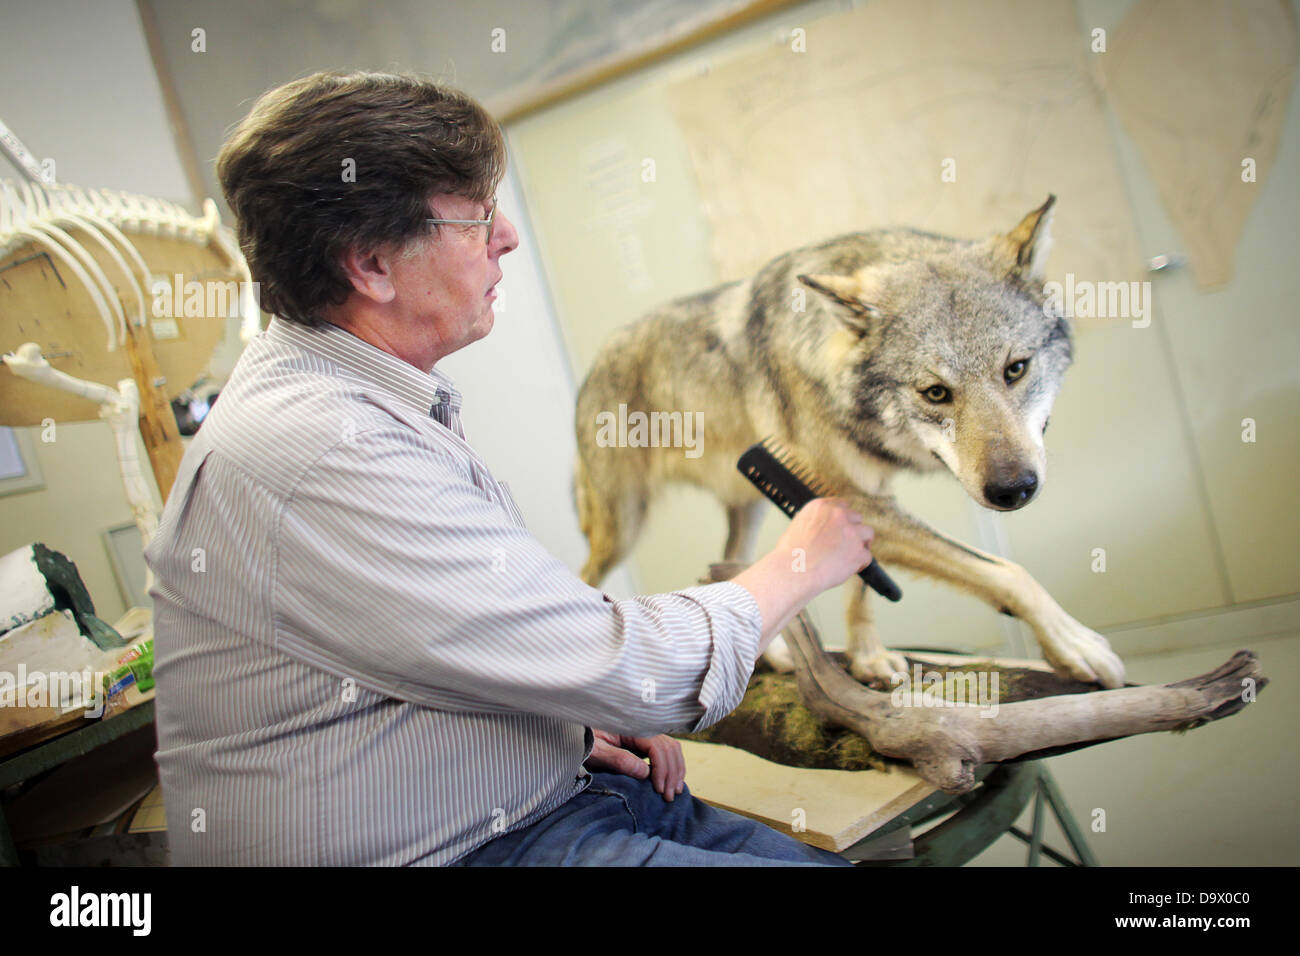 The biological preparateur Uwe Hildebrand brushes the fur of a stuffed wolf in the preparation workshop in the natural history museum in Mainz, Germany, 27 June 2013. The wolf who was shot in the Westerwald (lit. Western Forest) is showpiece of a Mainz exhibition. The stuffed animal will be shown in a special exhibition for the 25-year-anniversary of the natural history collection of the state of Rhineland-Palatinate. Photo: FREDRIK VON ERICHSEN Stock Photo